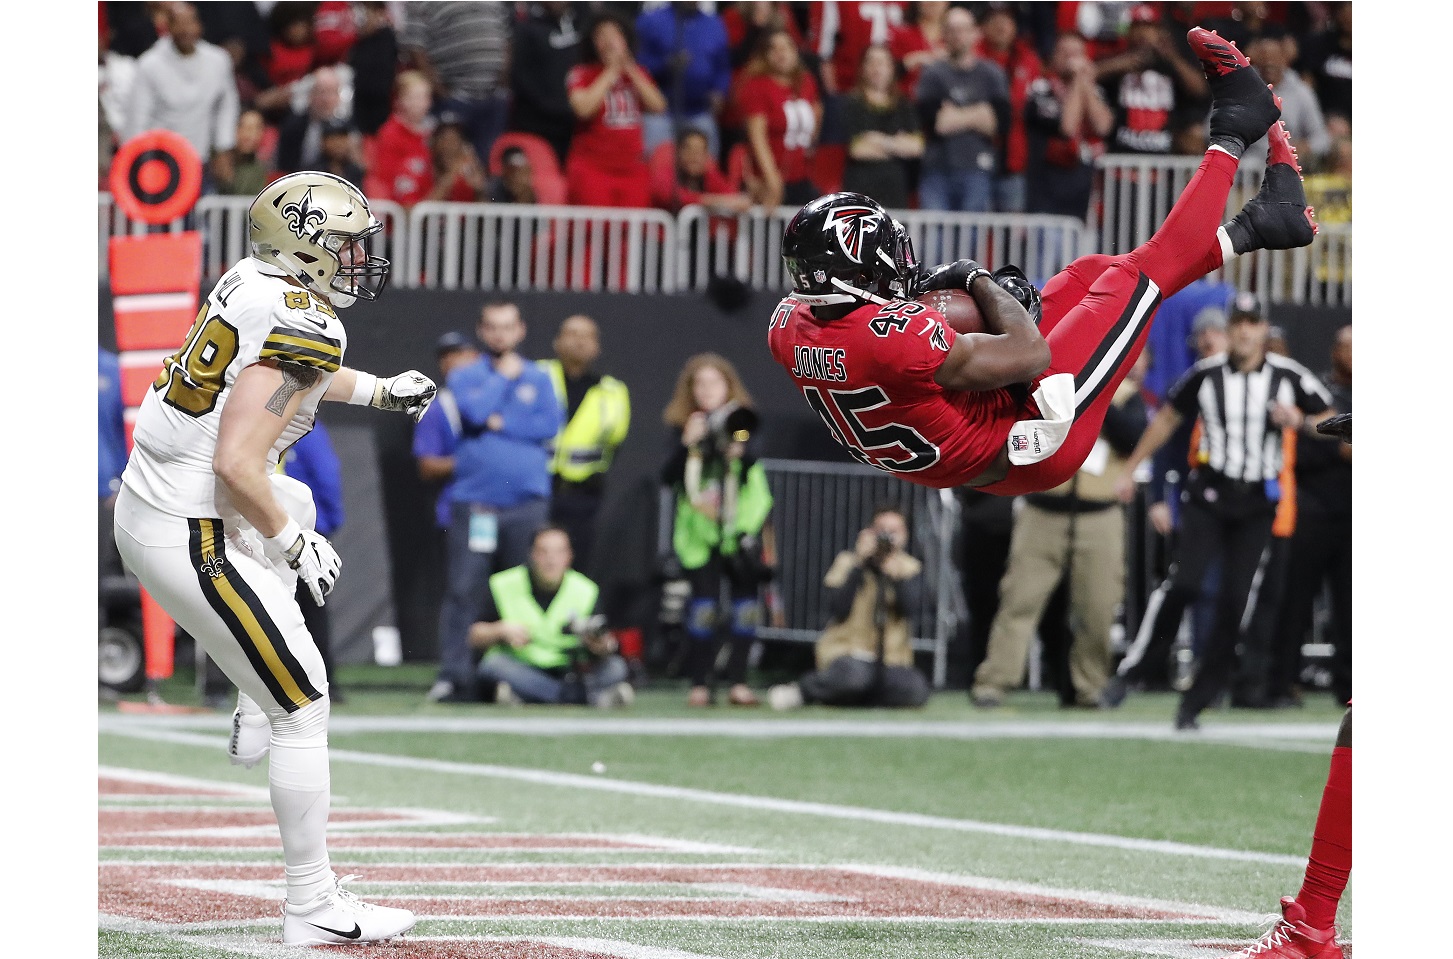 WATCH: Game-saving INT in end zone saves Falcons win